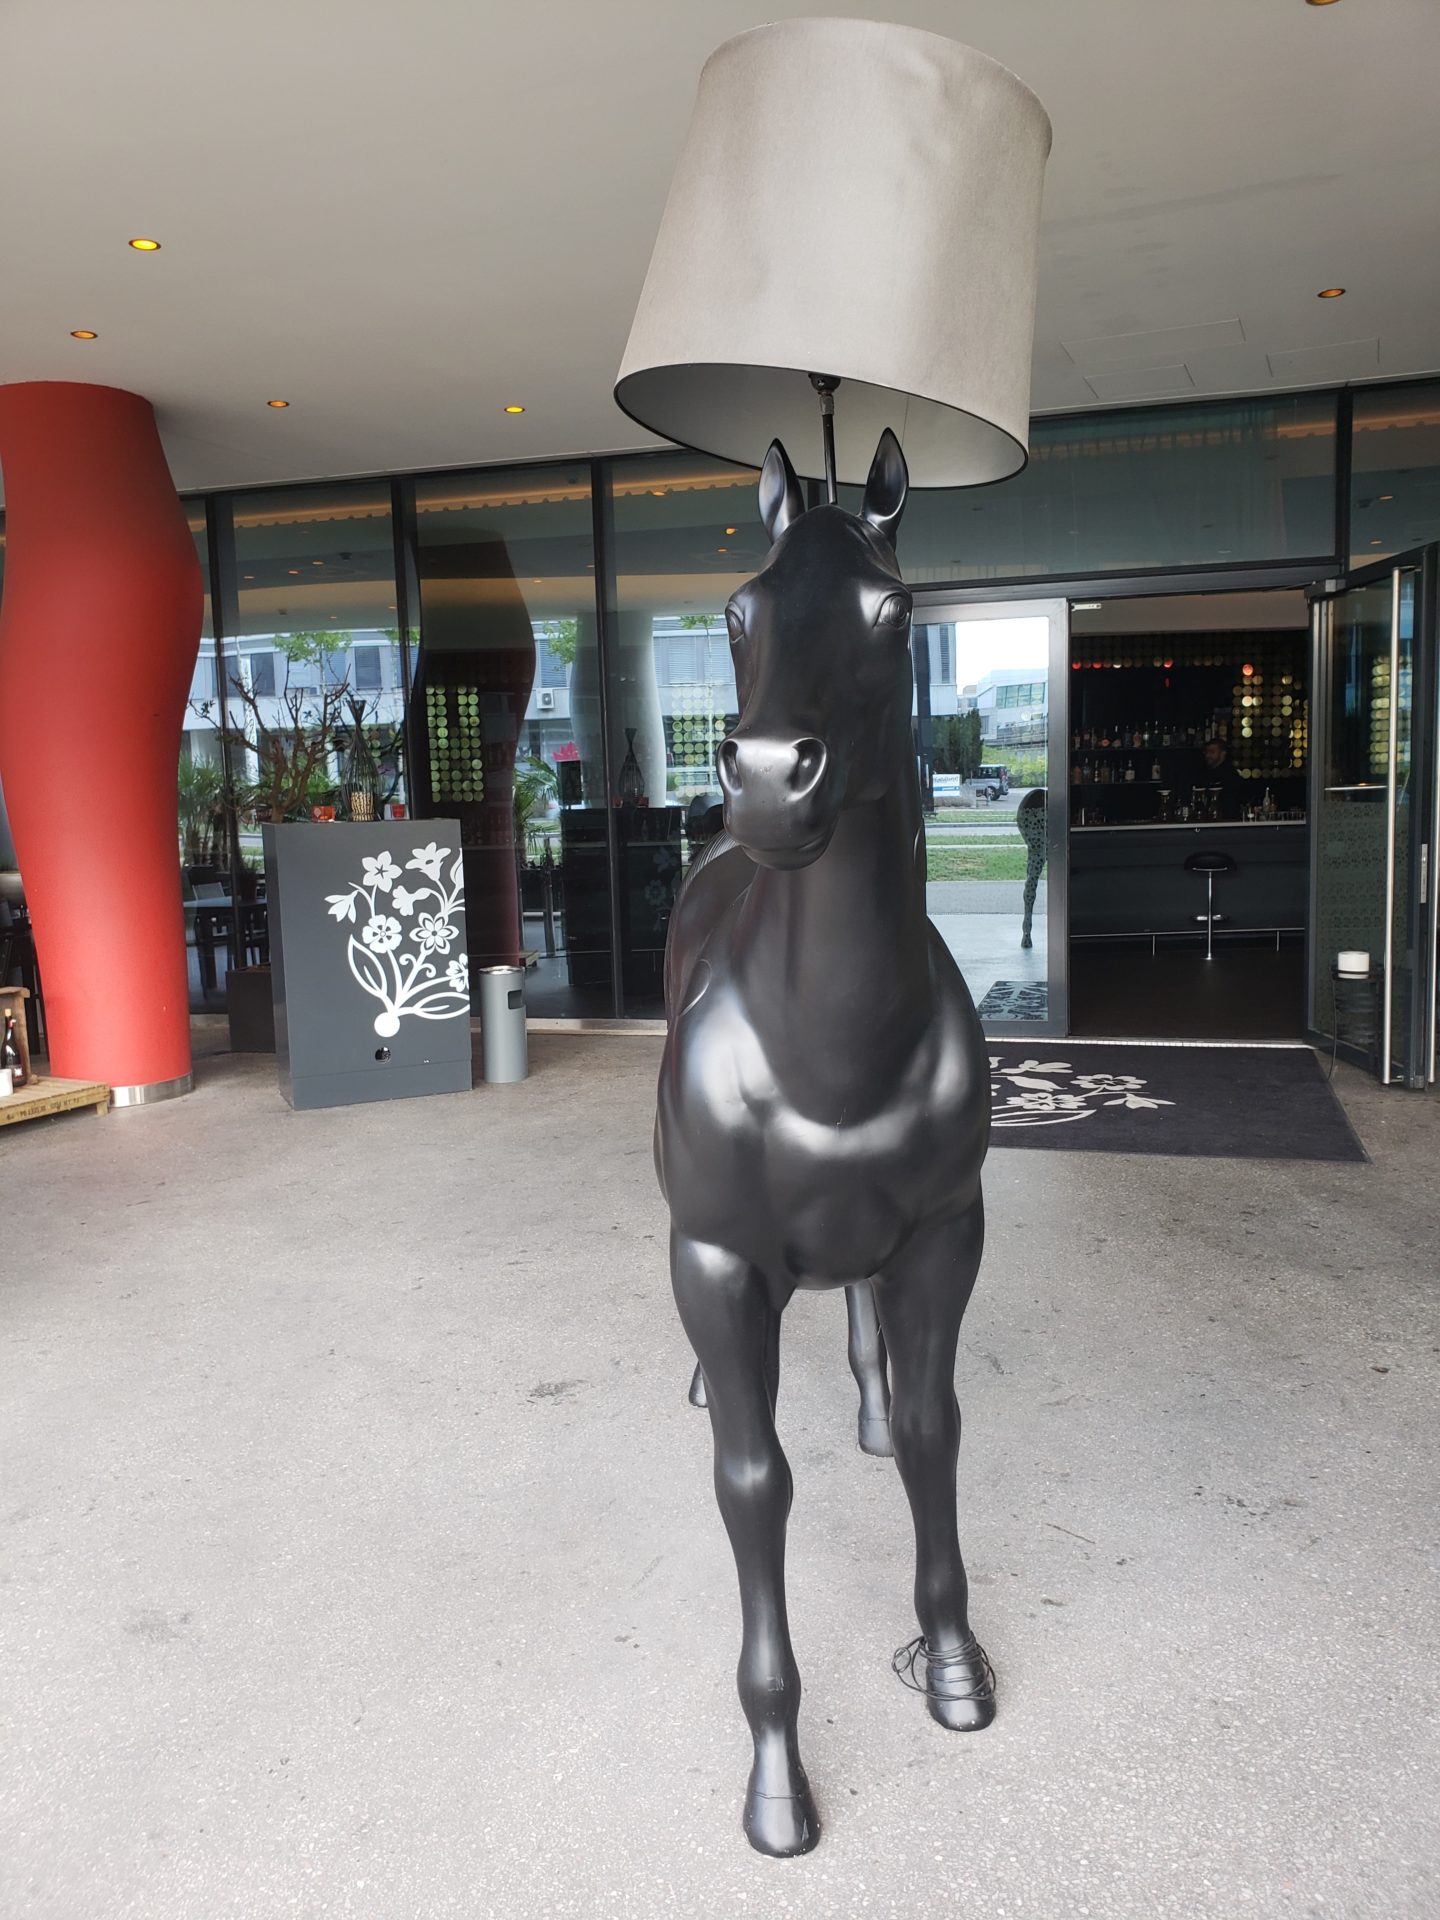 a statue of a horse in a building